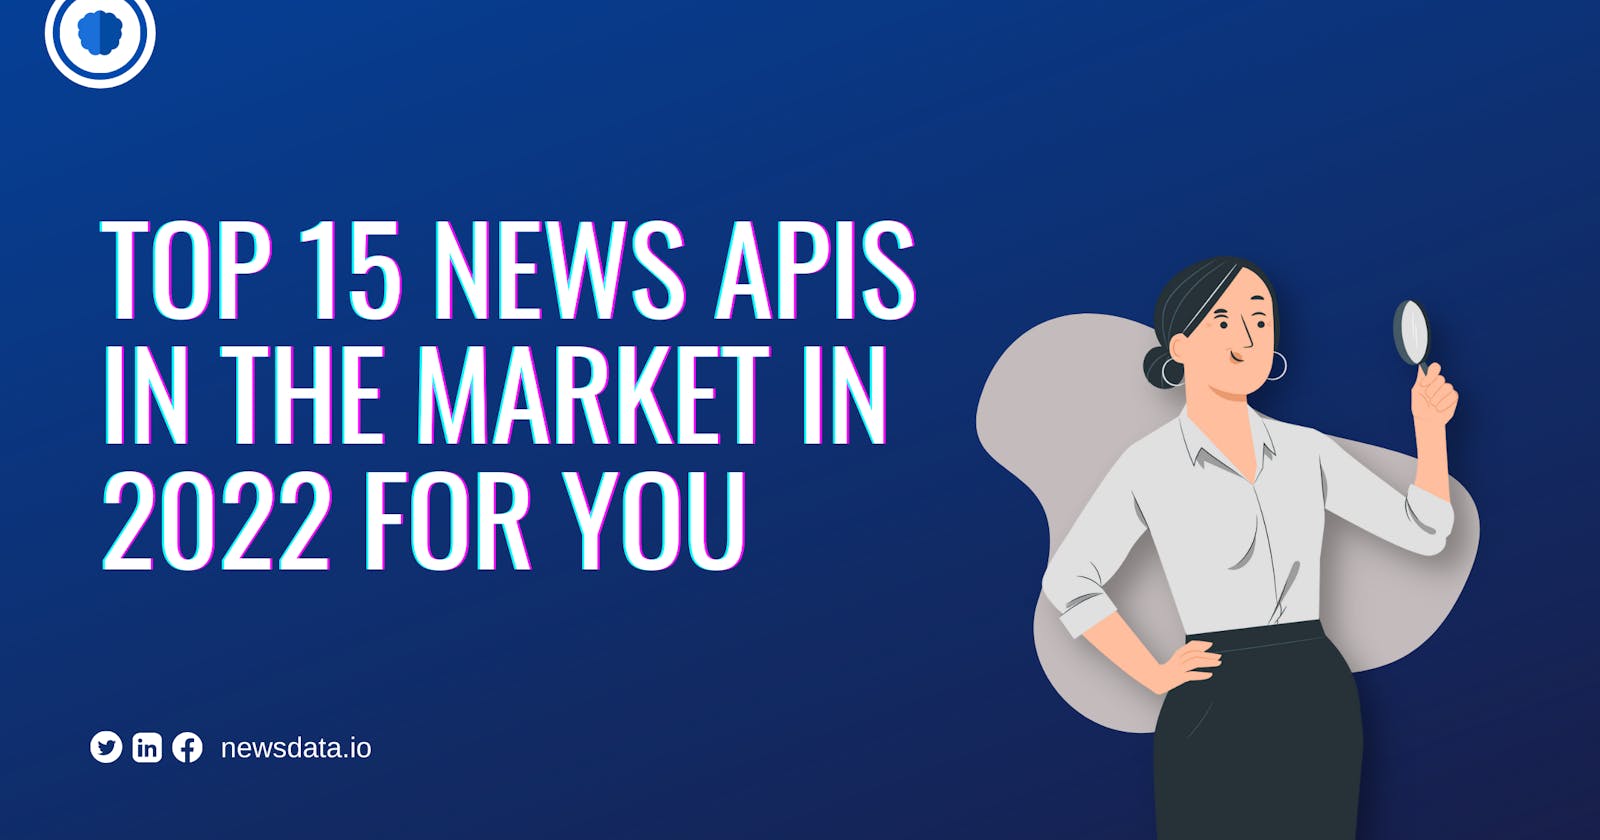 Top 15 News APIs In The Market In 2022 For You